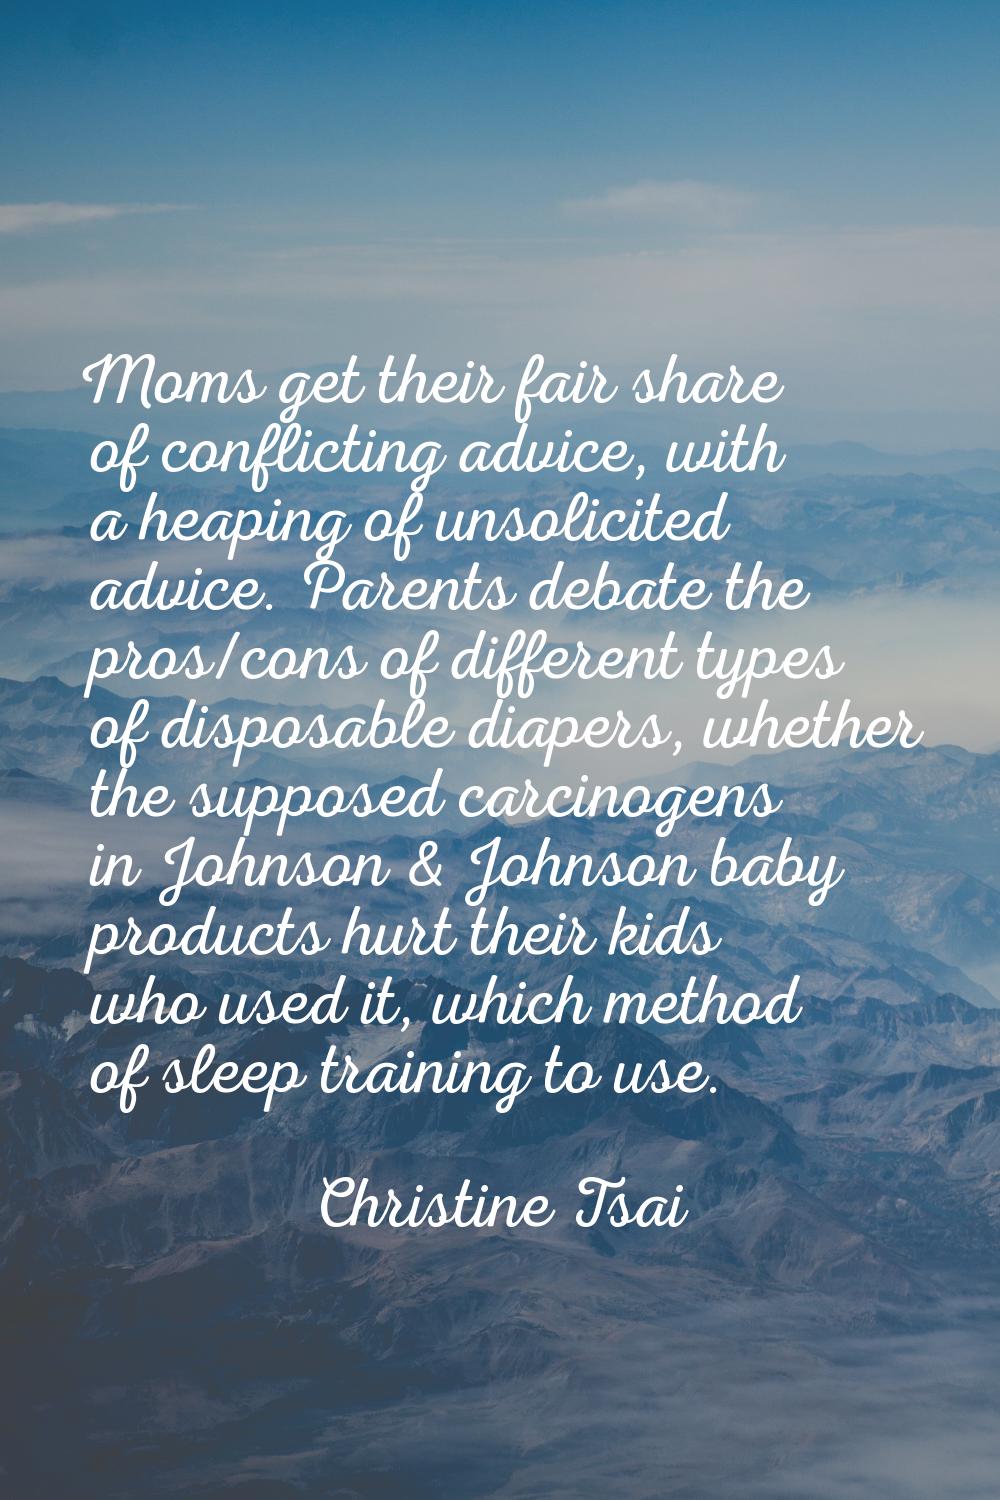 Moms get their fair share of conflicting advice, with a heaping of unsolicited advice. Parents deba